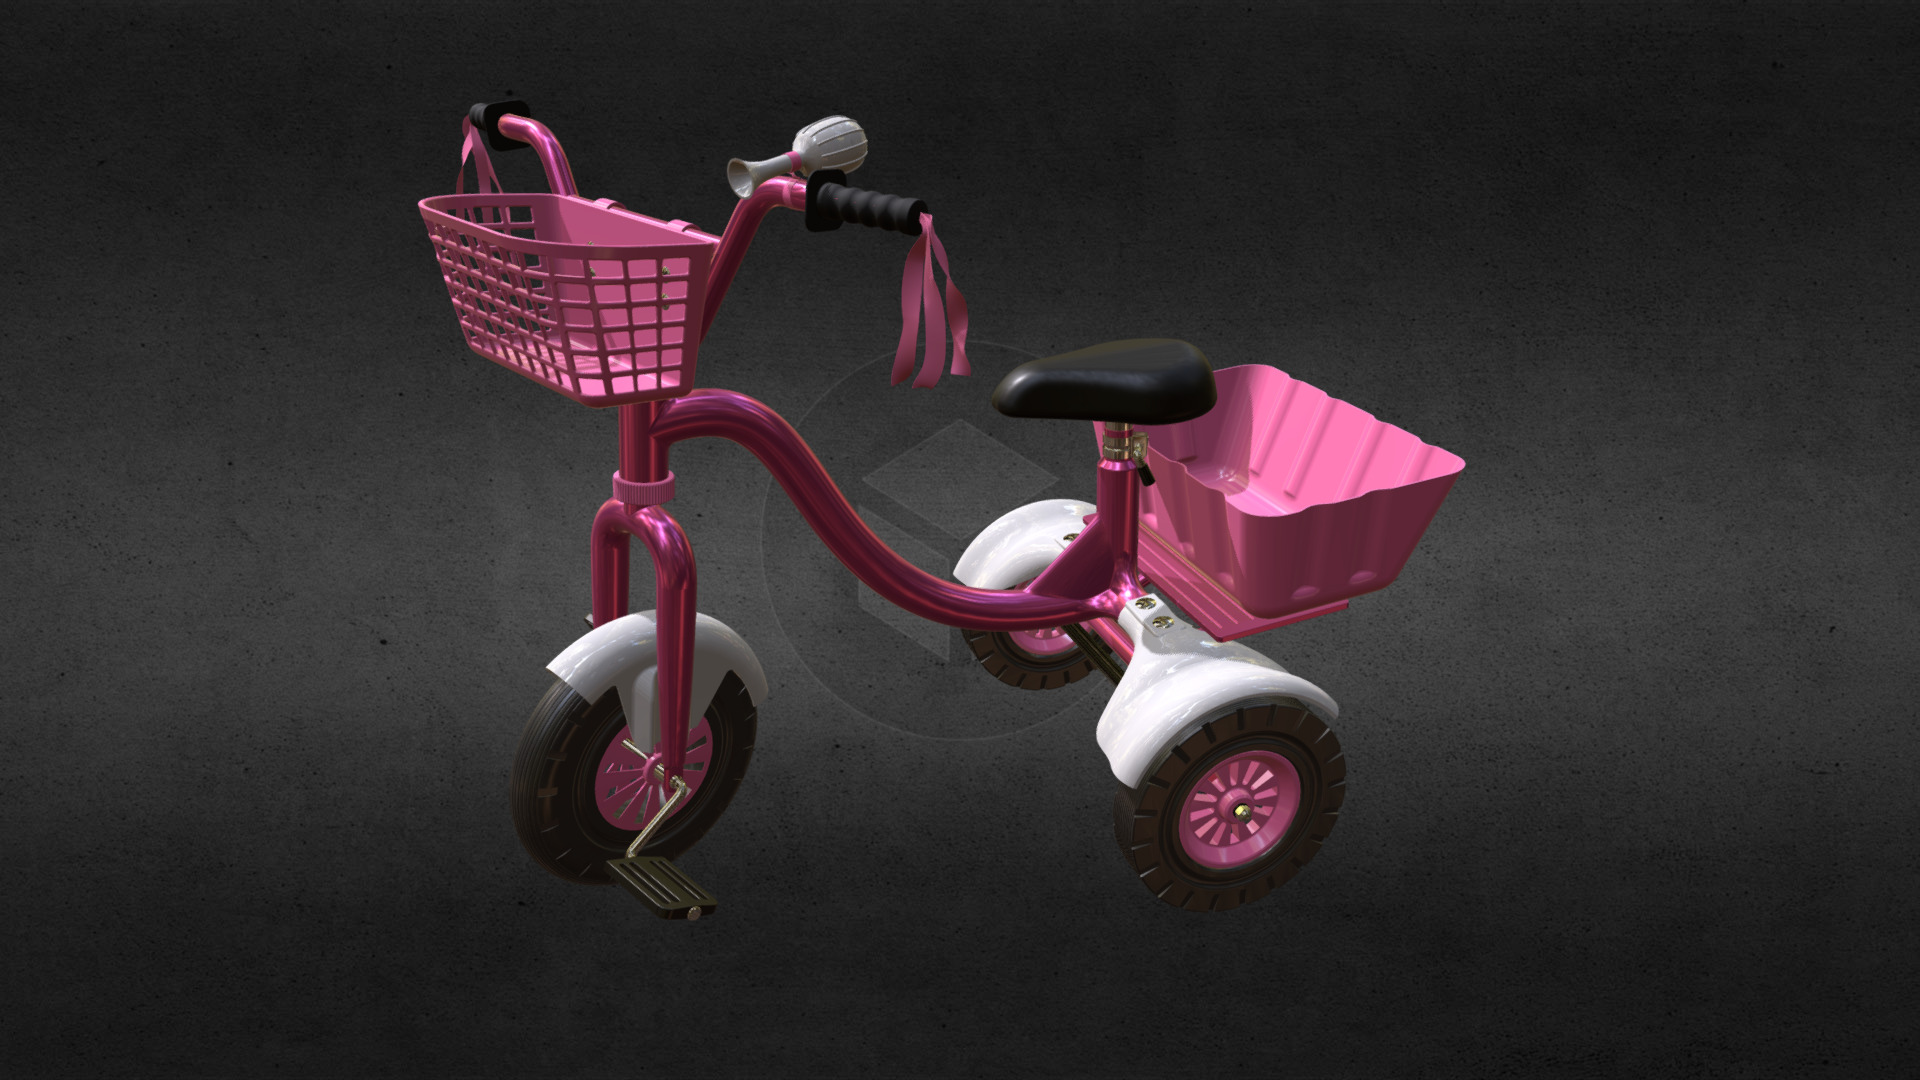 3D model Tricycle - This is a 3D model of the Tricycle. The 3D model is about a pink tricycle with a basket.